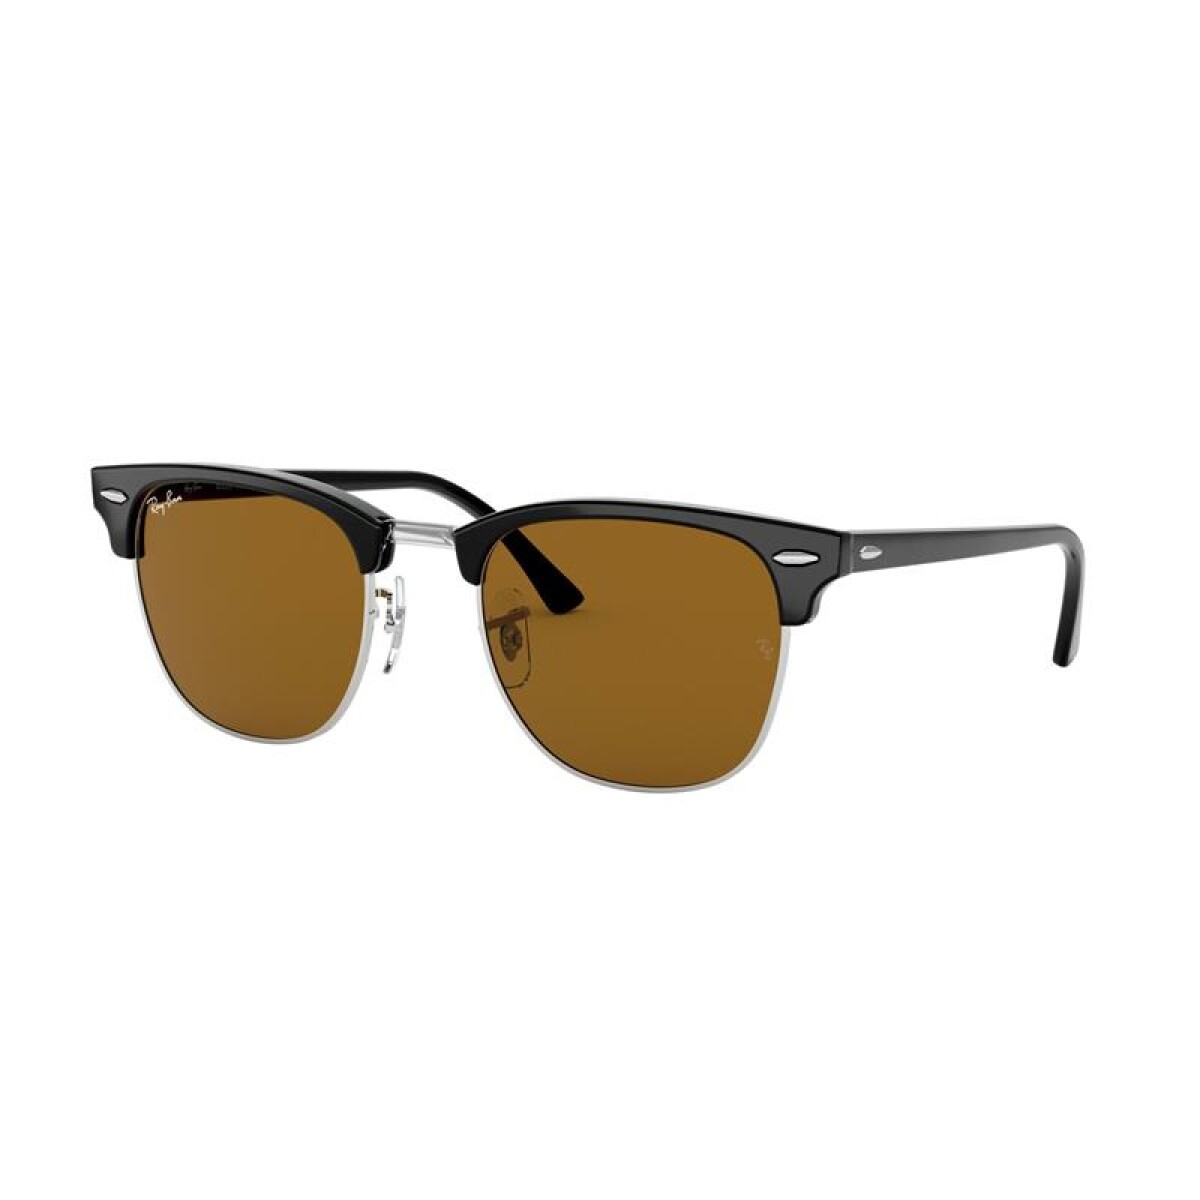 Ray Ban Rb3016 - W3387 